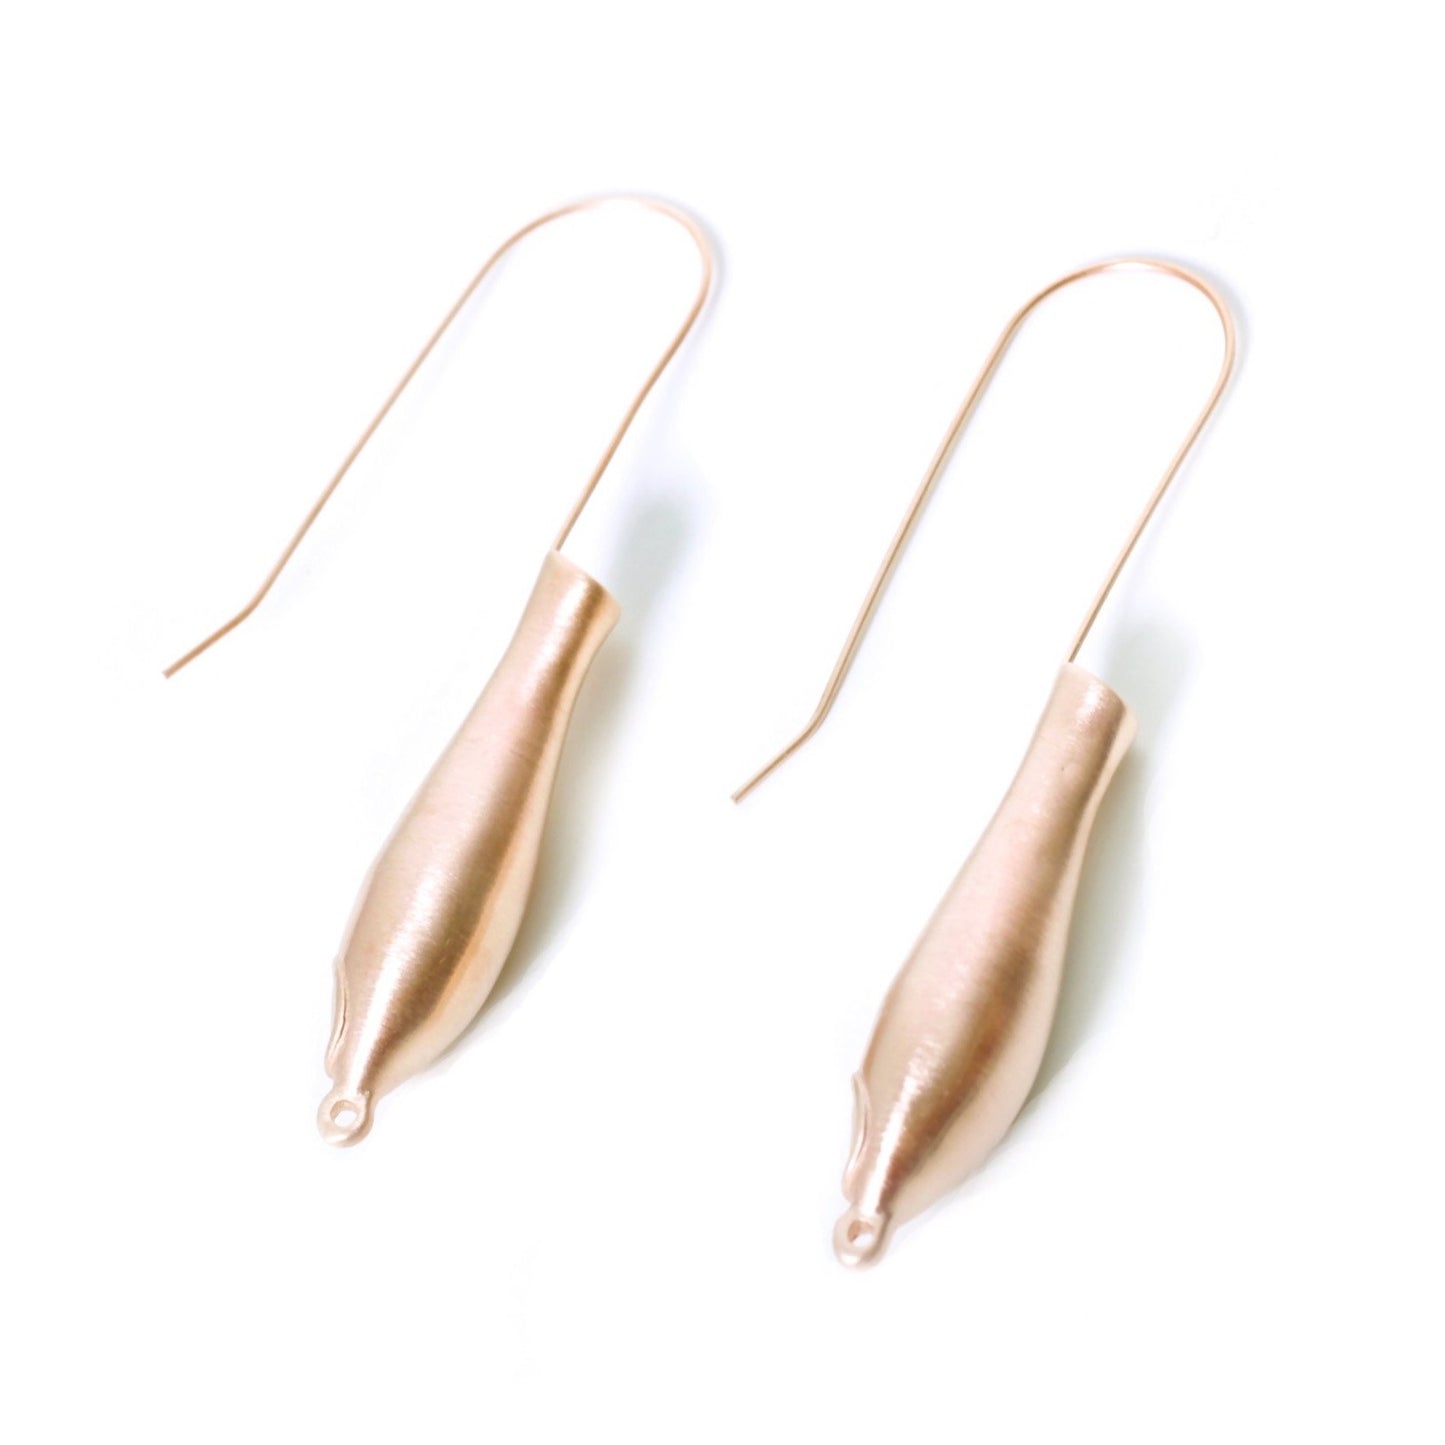 Brushed Pink or Rose Gold Fleurings Earrings : An ideal finish for weddings 